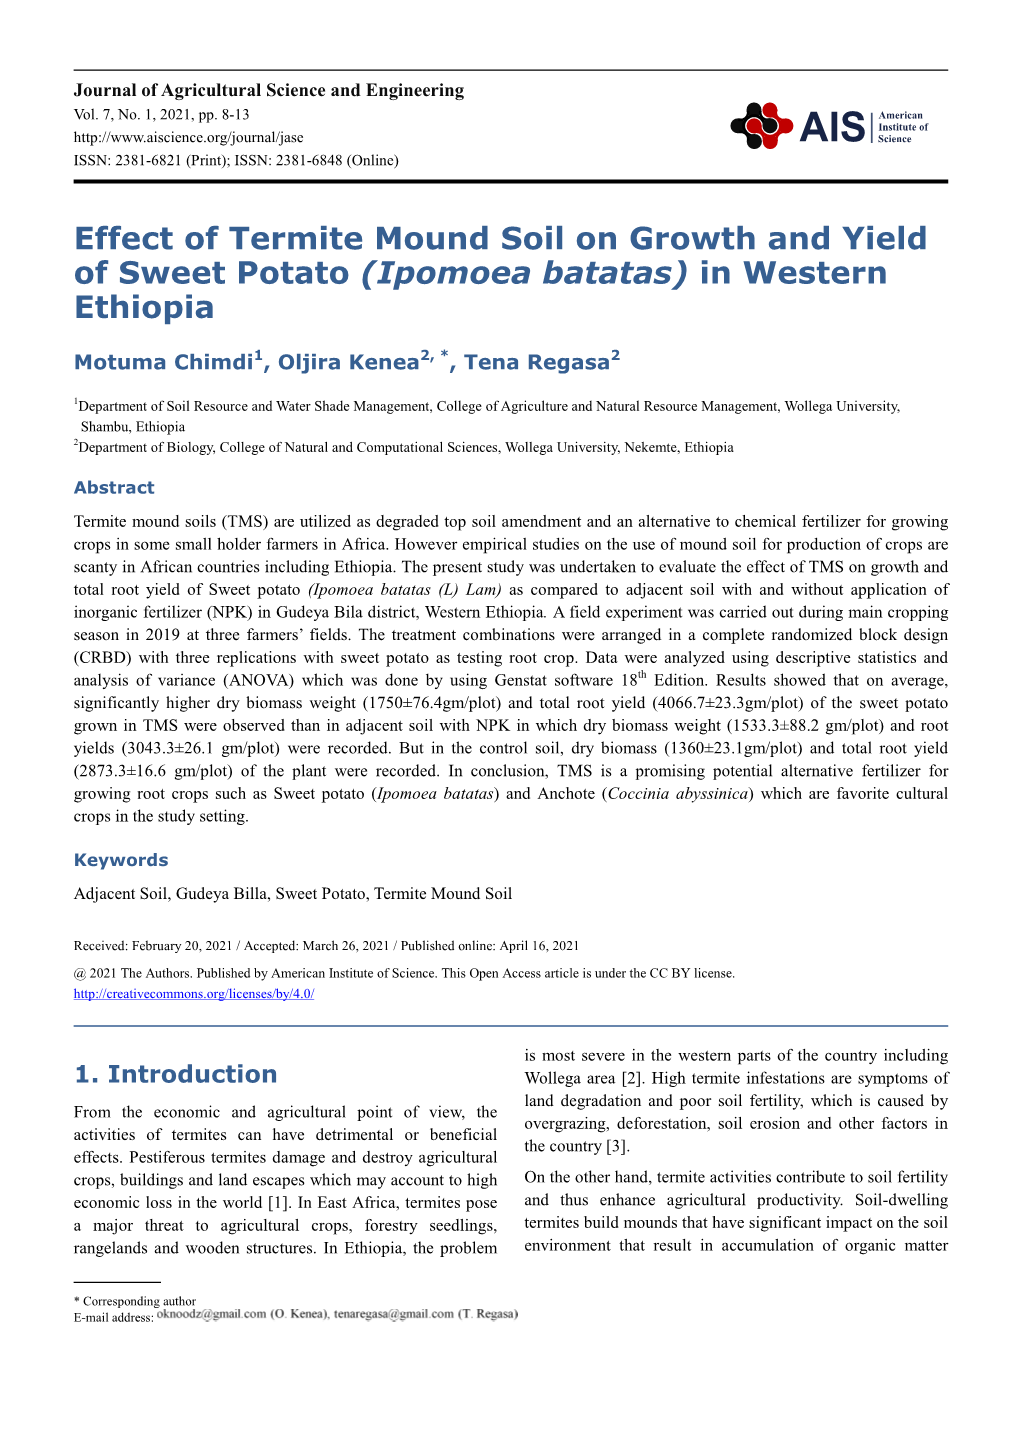 Effect of Termite Mound Soil on Growth and Yield of Sweet Potato (Ipomoea Batatas) in Western Ethiopia